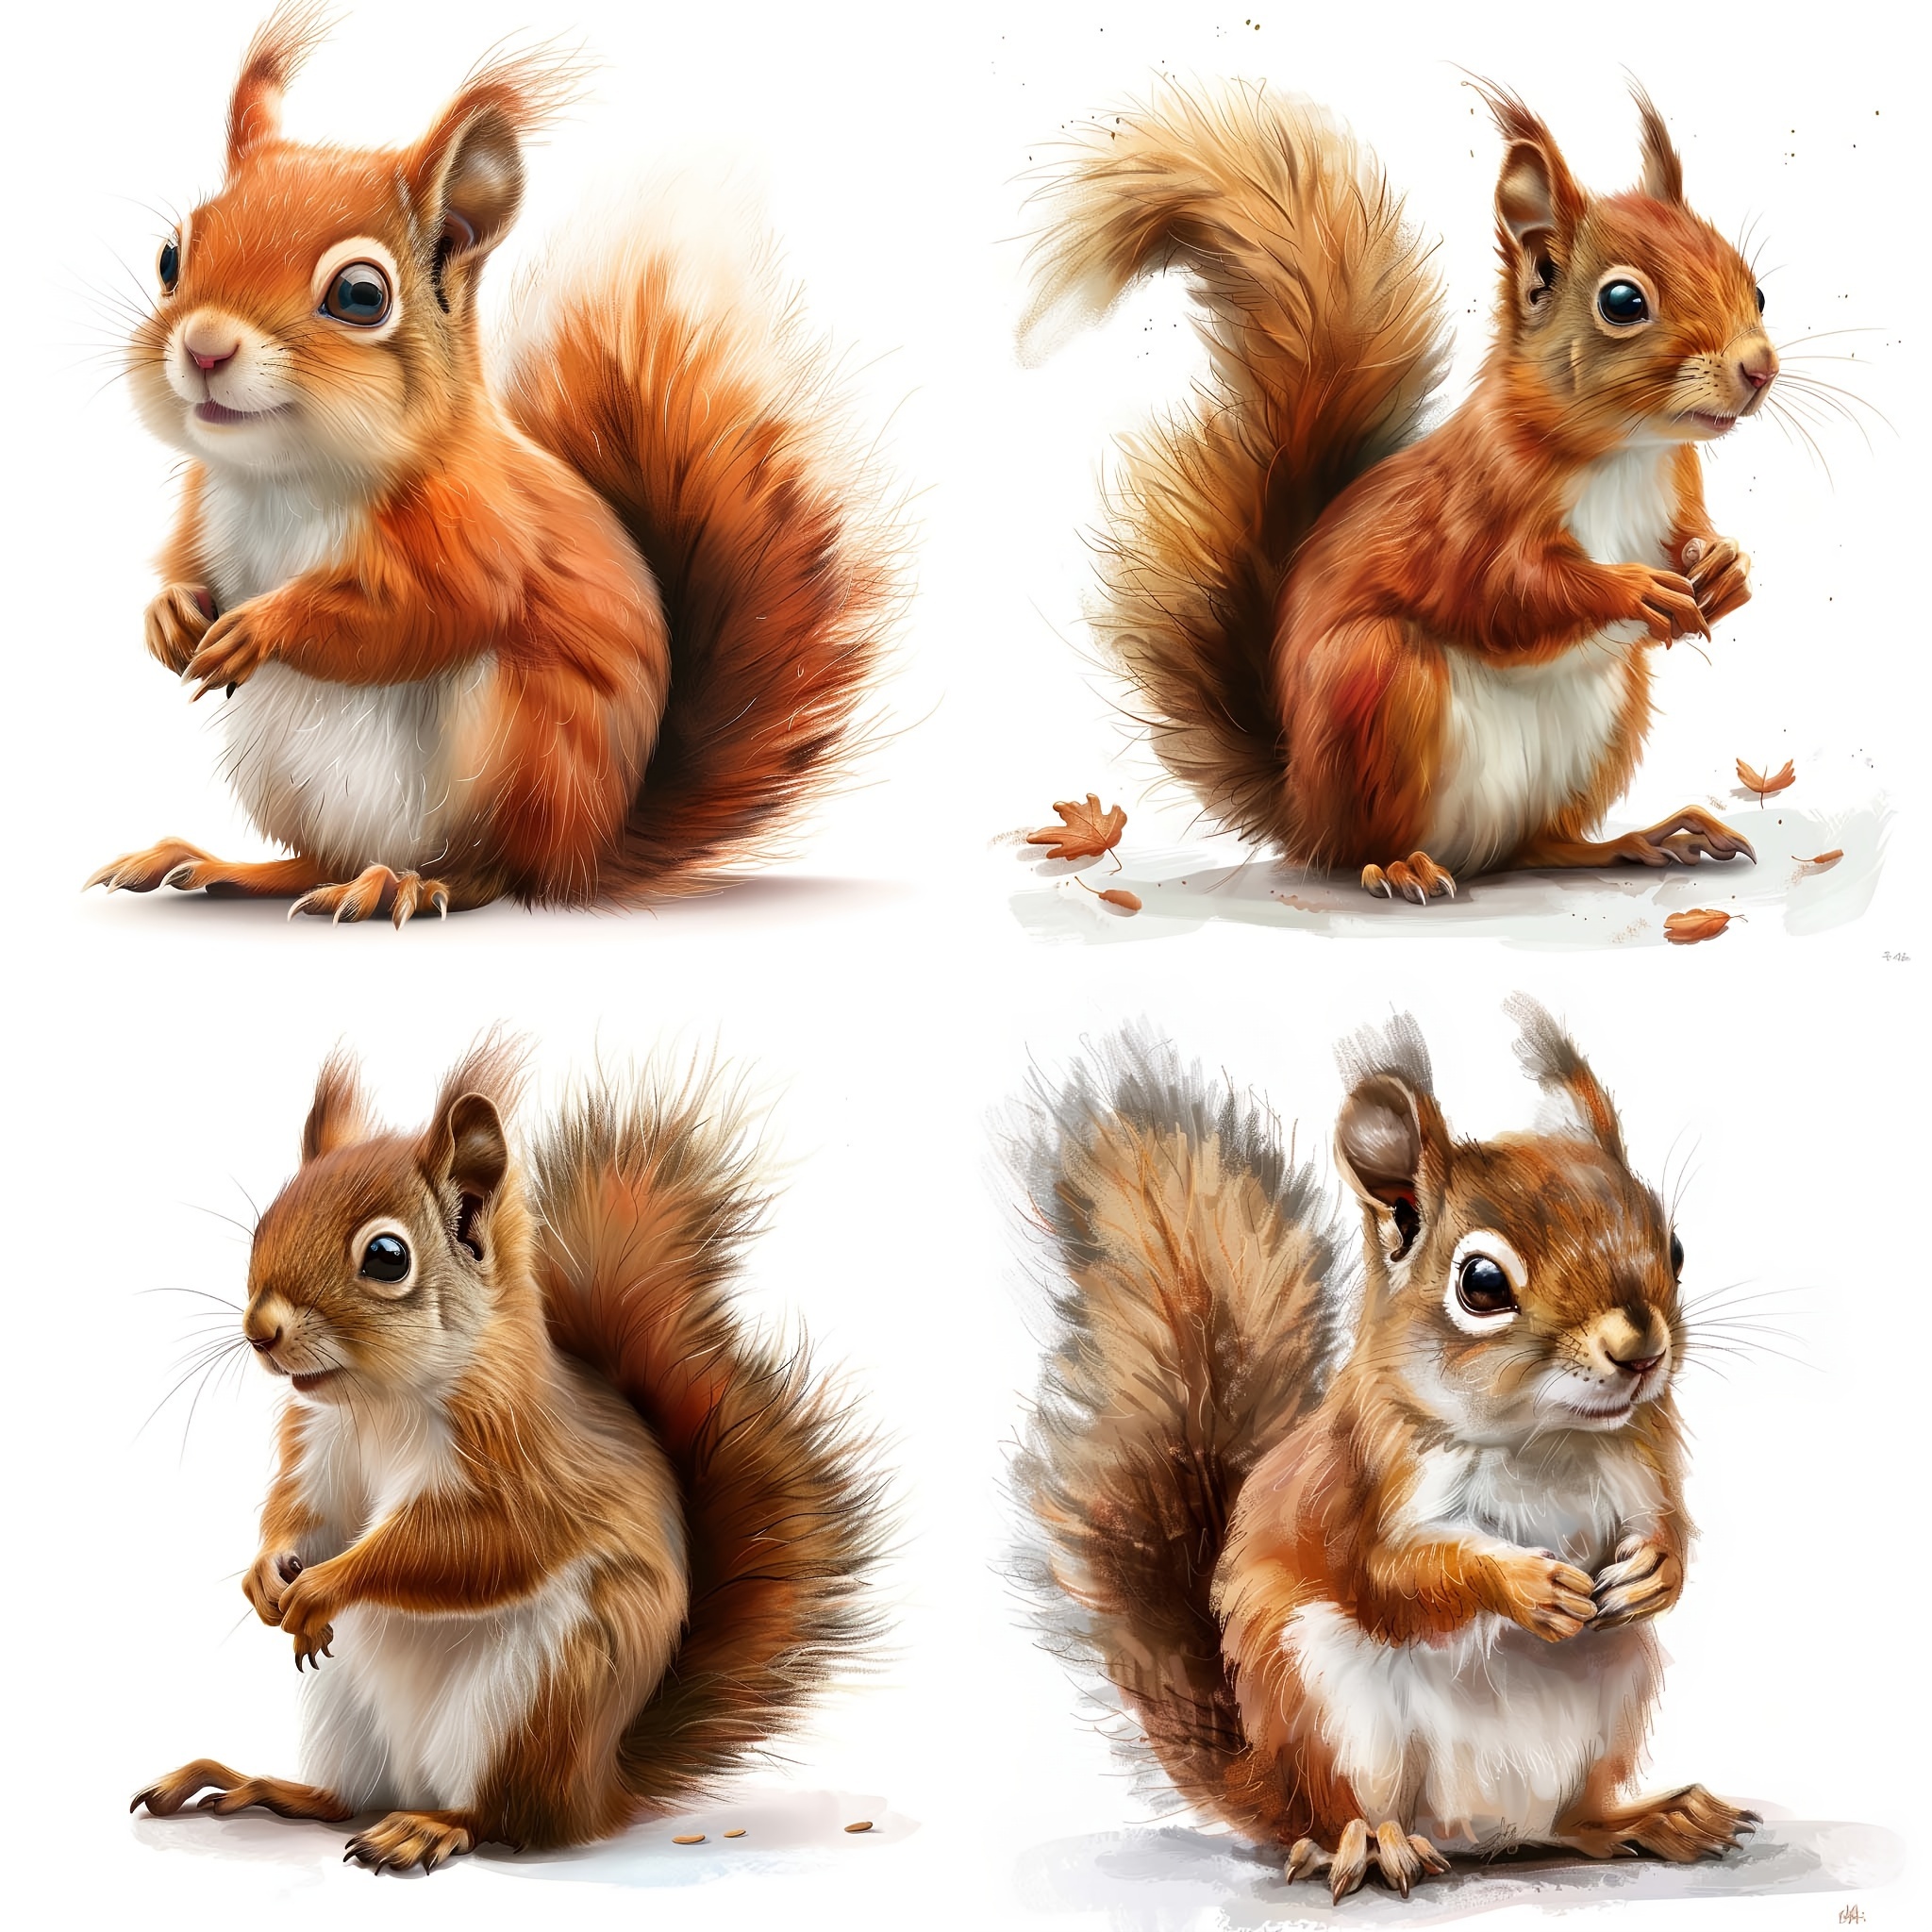 

4 In 1 Anime Squirrel Stickers, Tpu Coated Double-layer Color Composite Printing, For Cars, Windows, Bumpers, Laptops